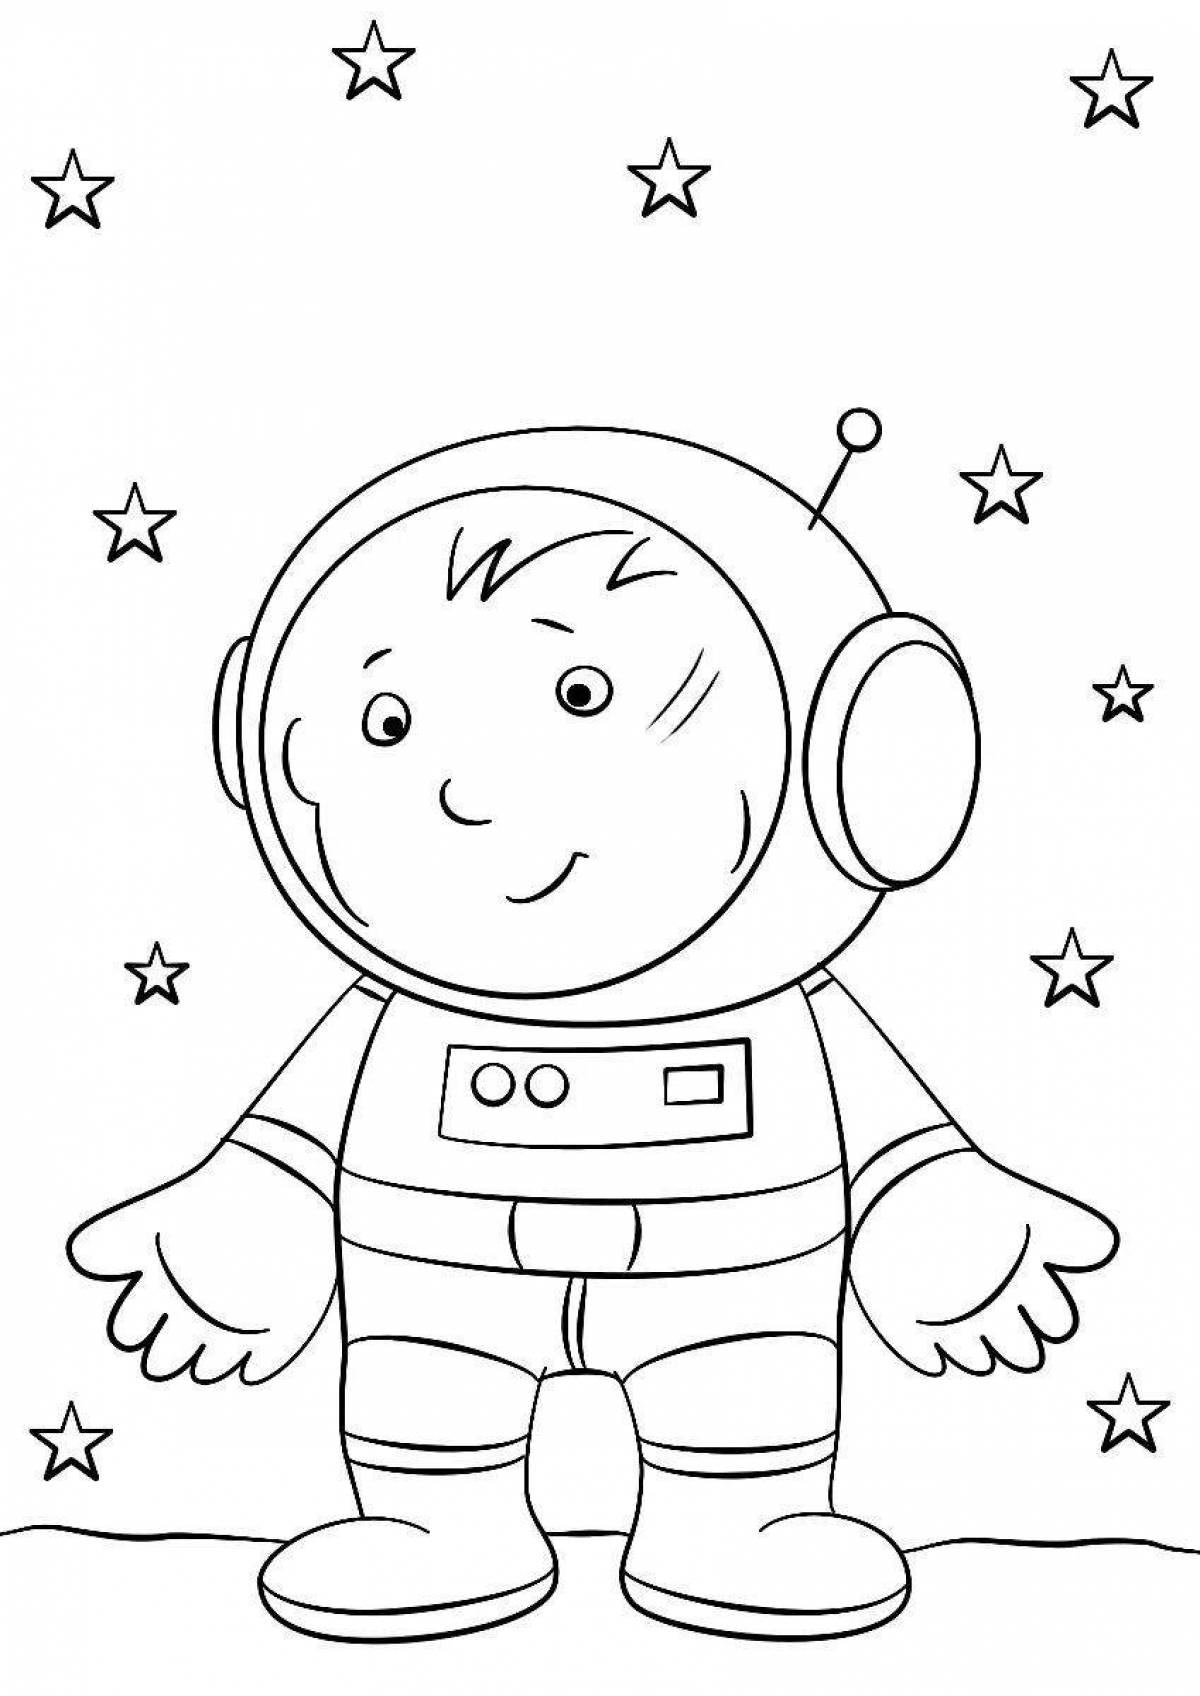 Cosmonaut bright coloring for kids